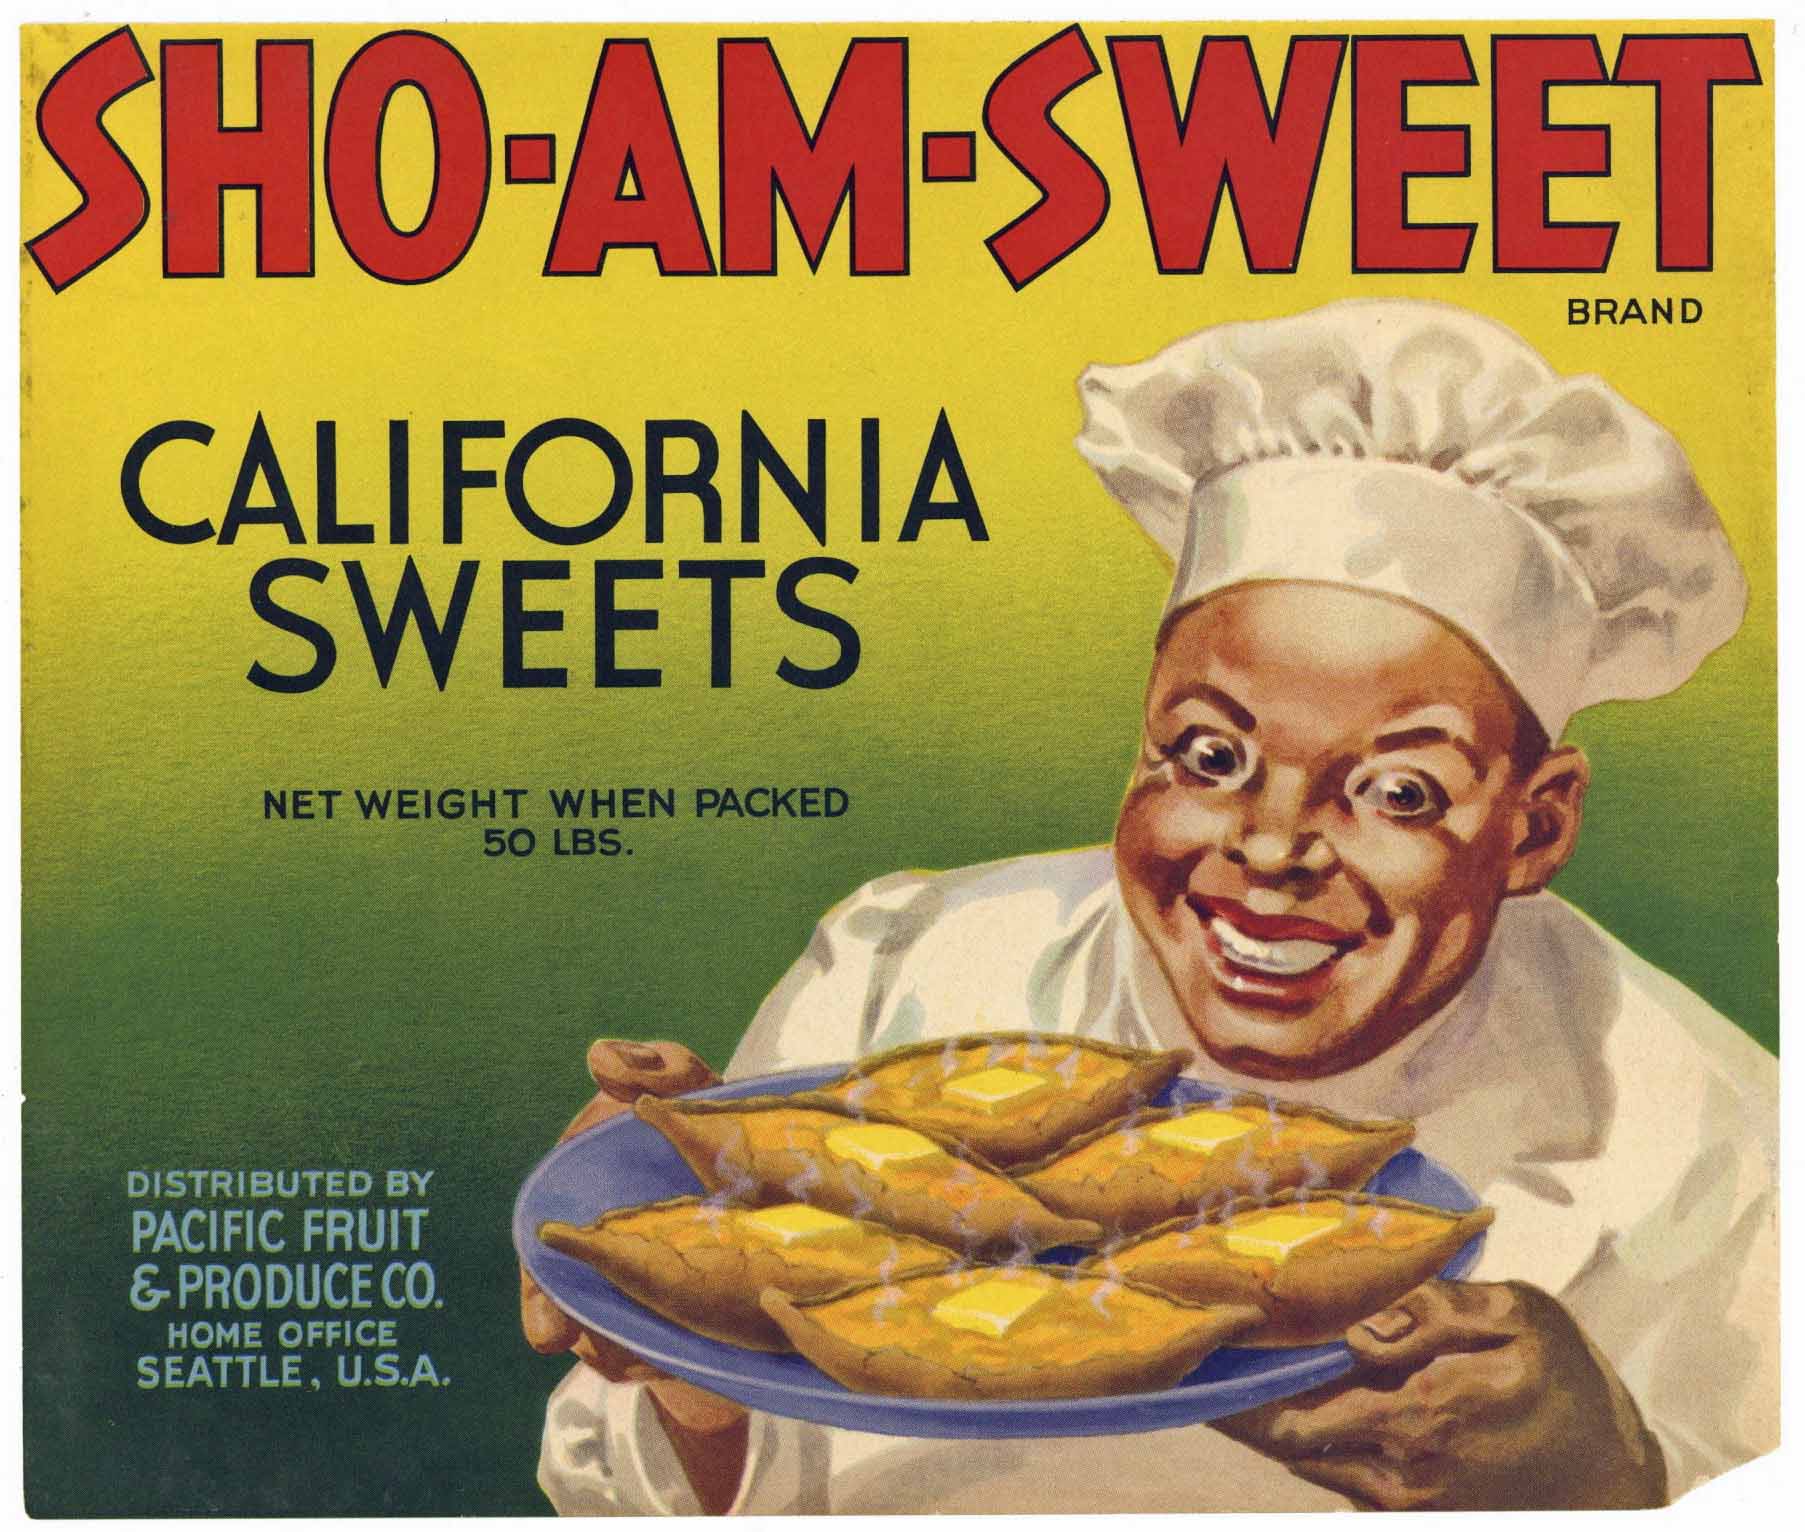 Sho - Am - Sweet Brand Vintage  Yam Crate Label, large